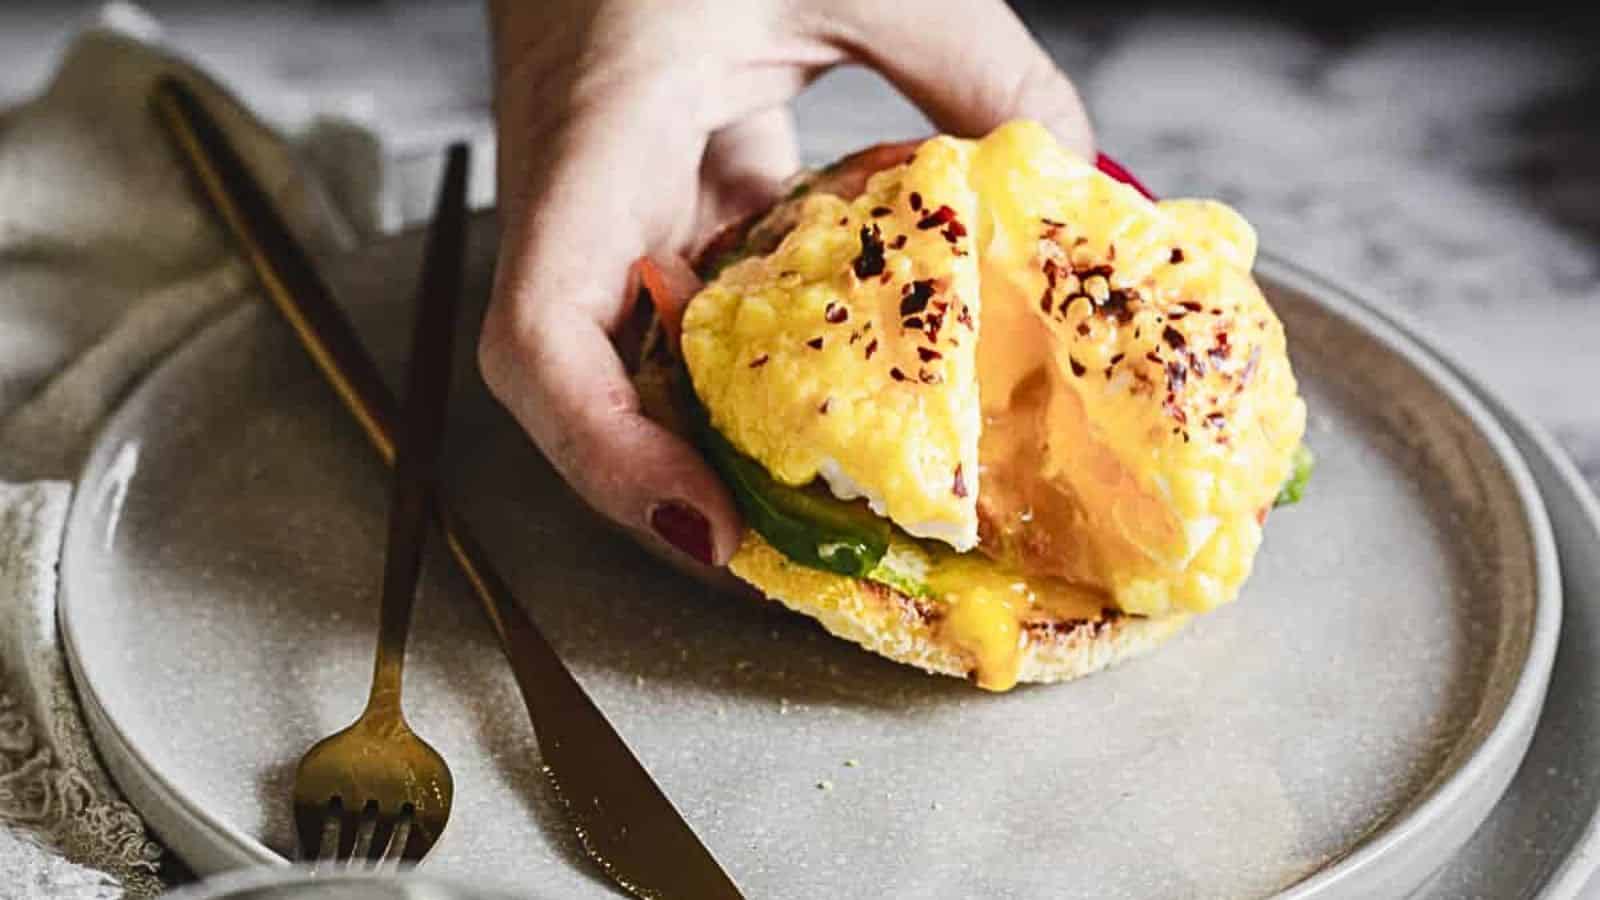 Meatless and Vegetarian Eggs Benedict Recipe with Avocado (Gluten free option!).